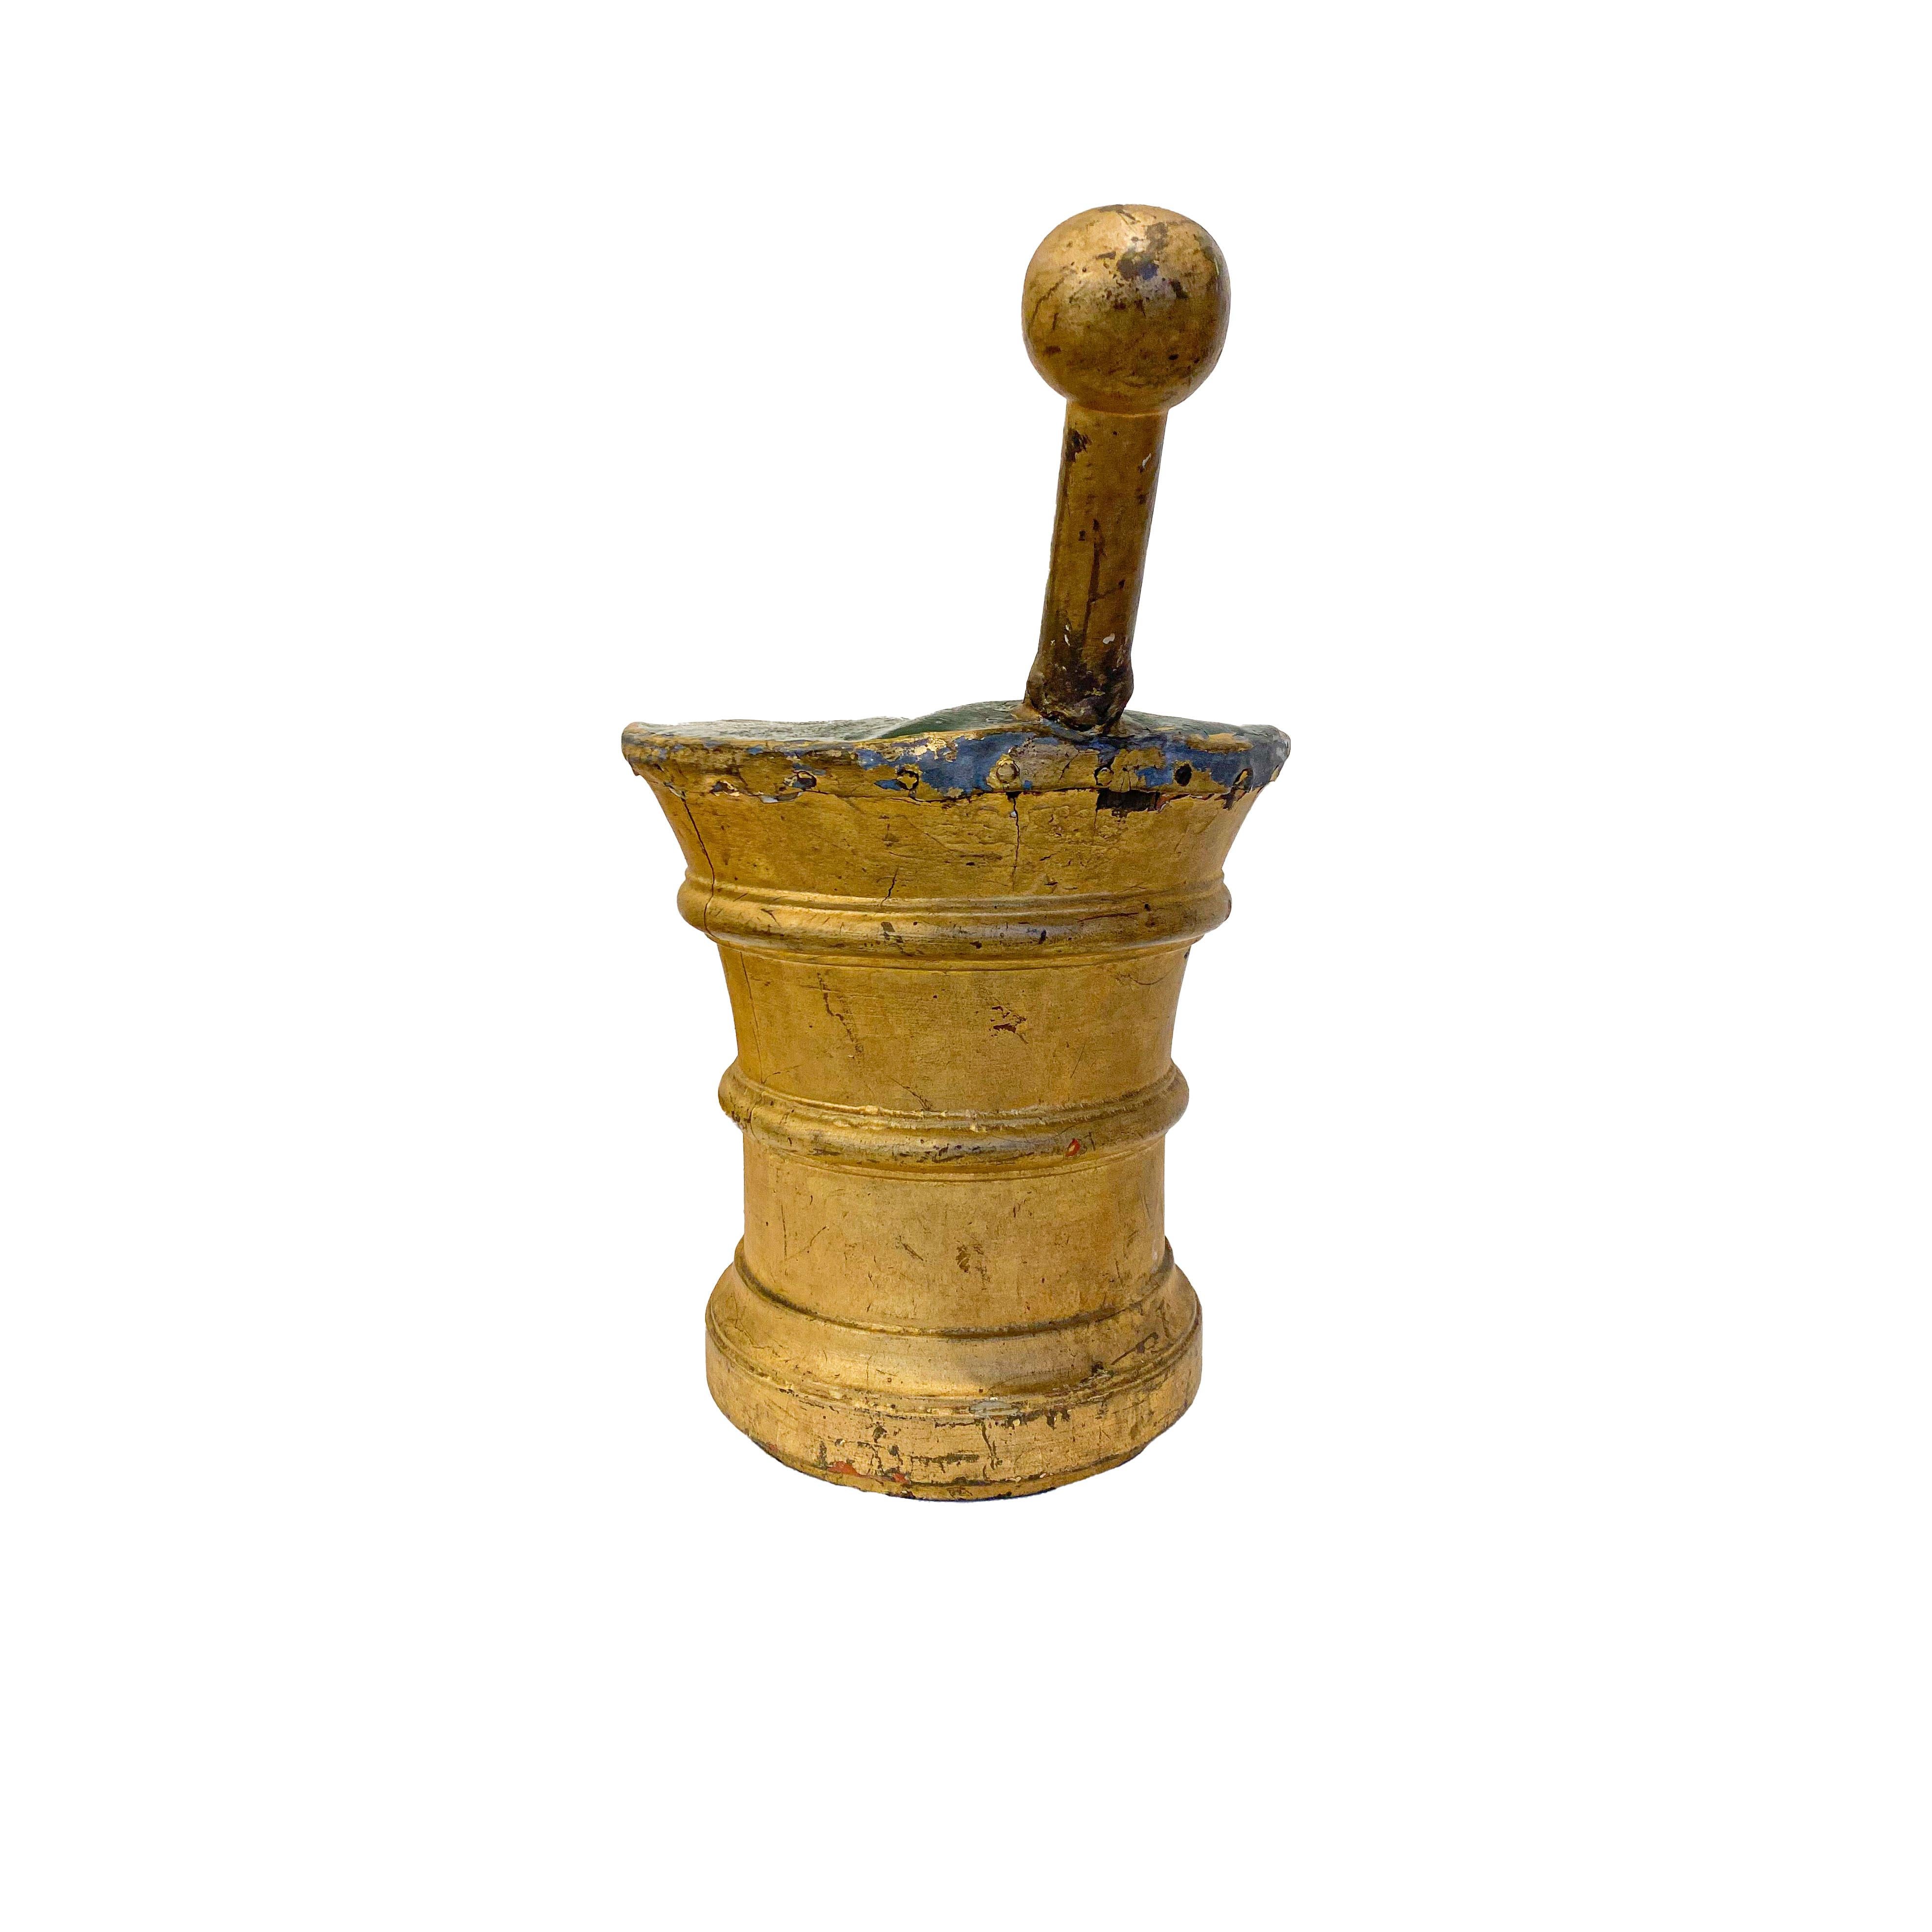 Figural trade sign in the form of a mortar and pestle, both the mortar and pestle are hand turned and gilded, with strong ring turnings. The top is capped with zinc and still bears in service green paint. The gilding has a remarkable warm patina.